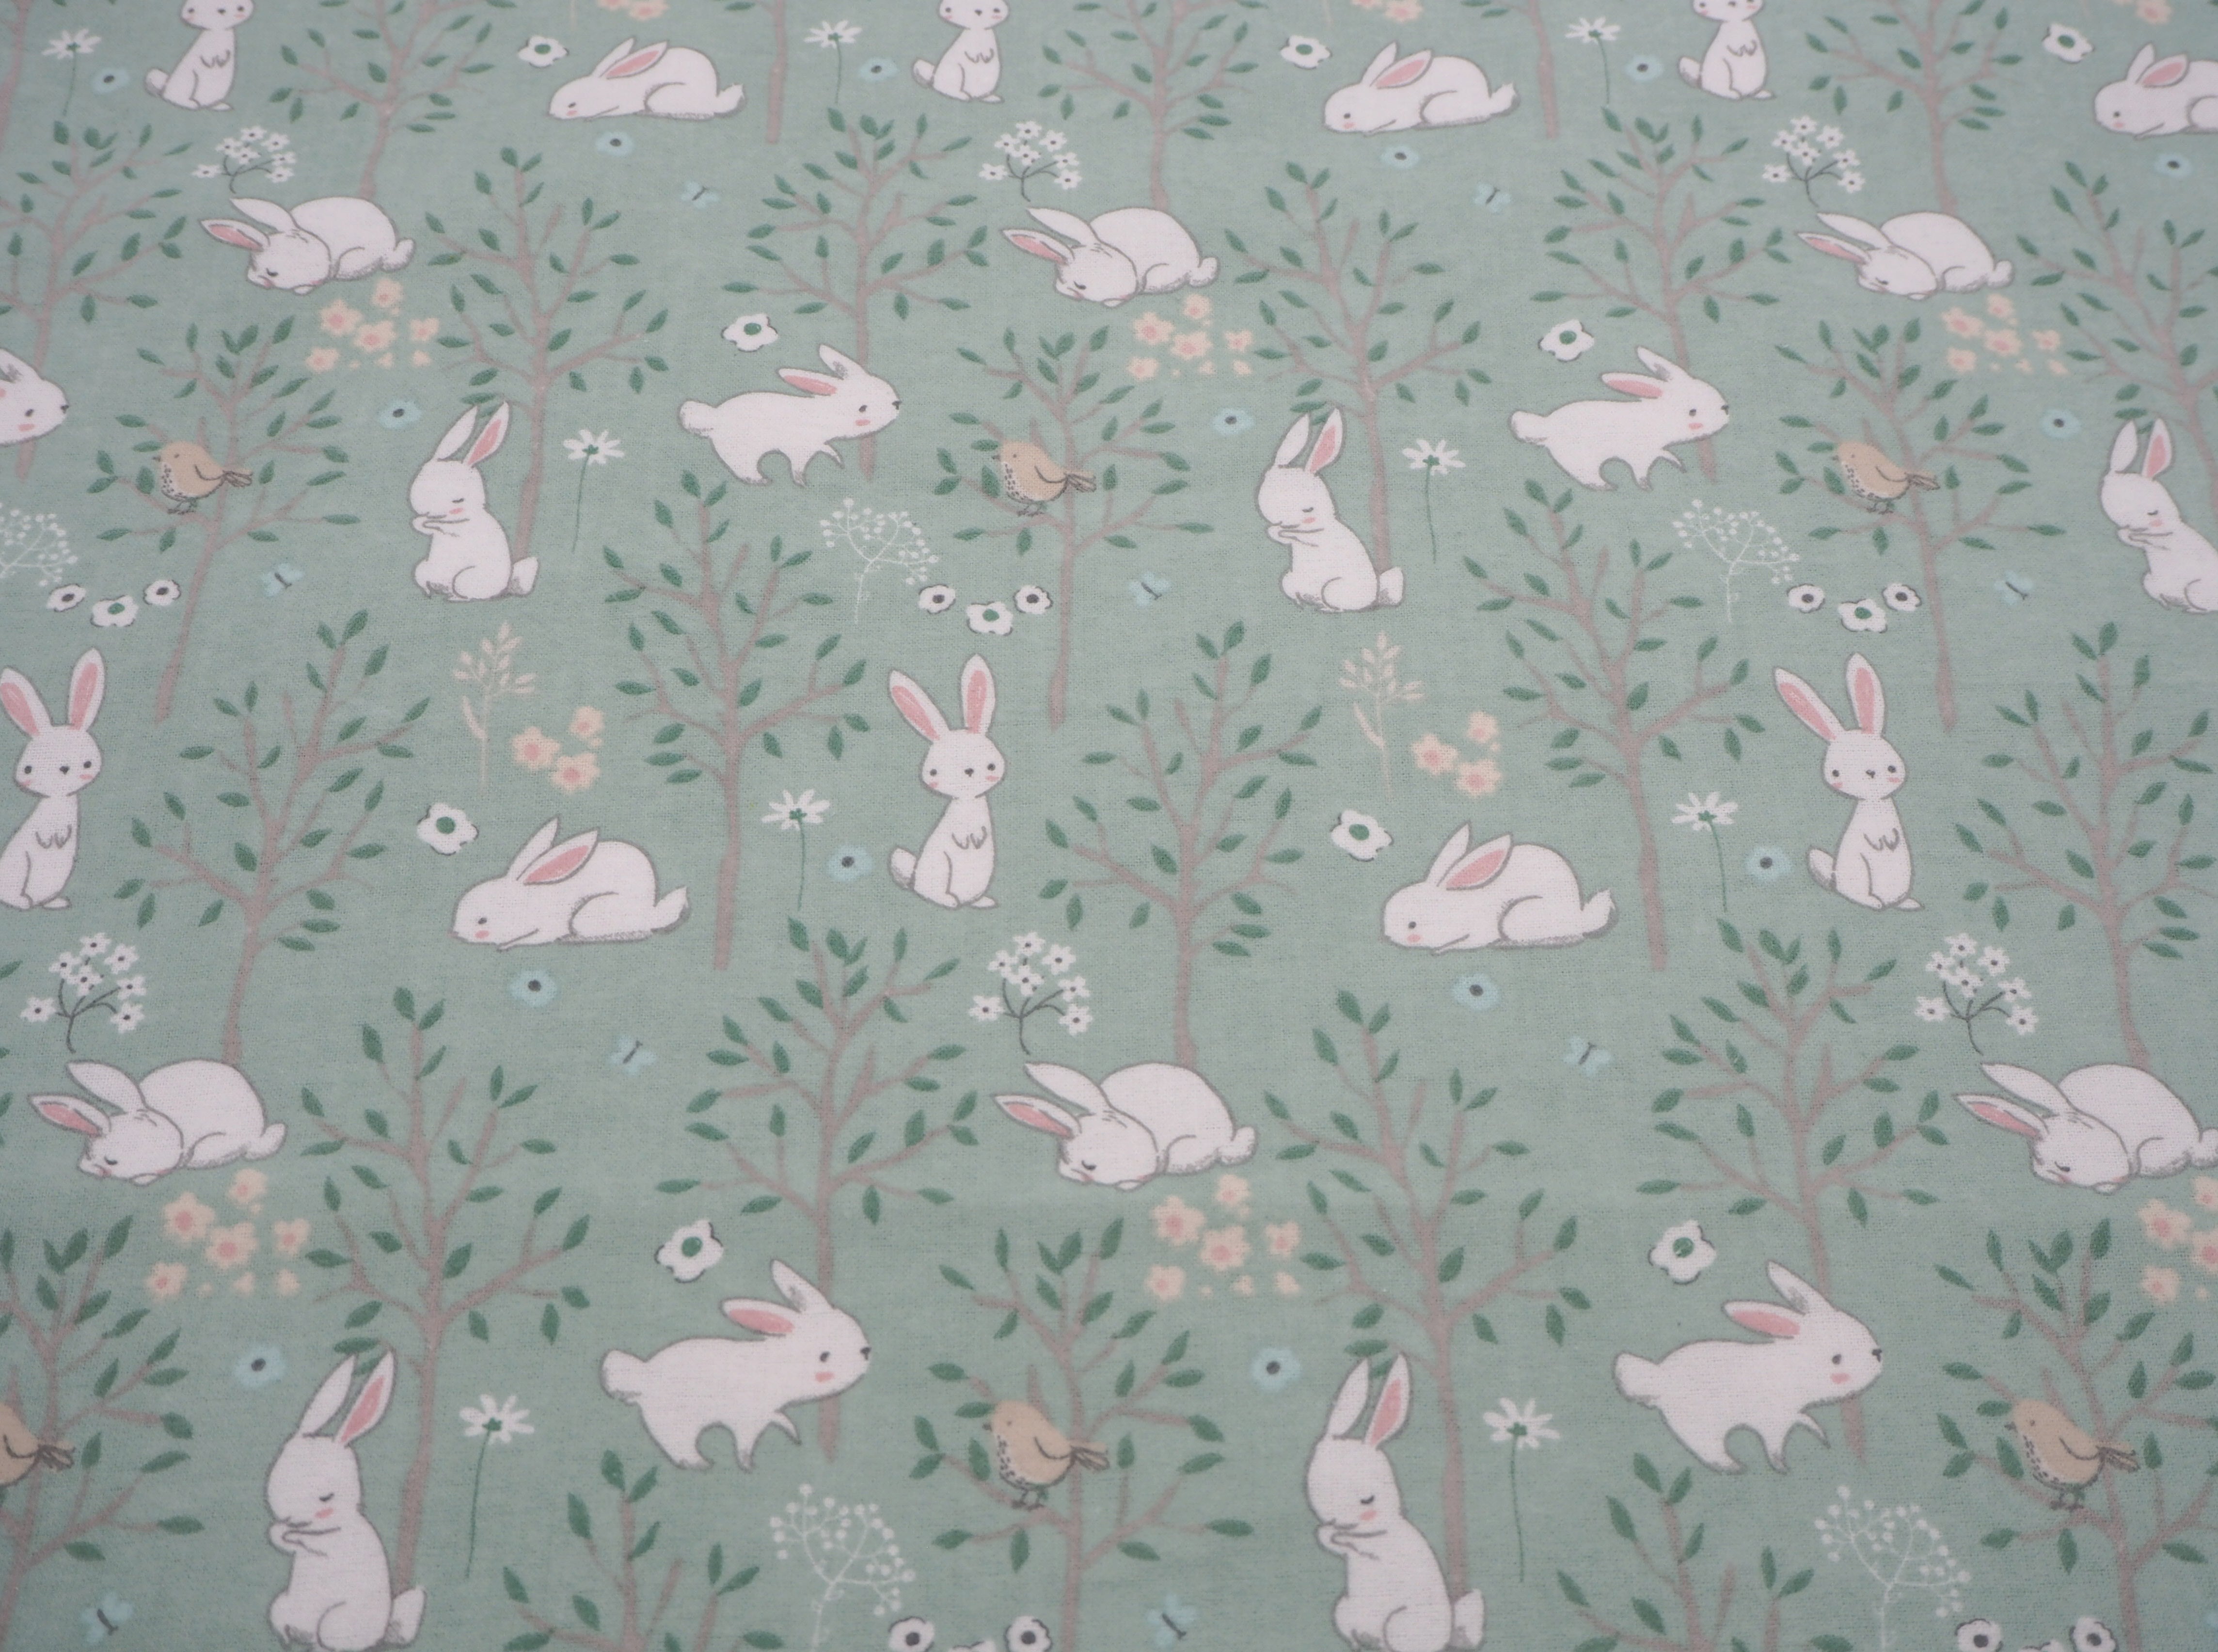 Fabric view, featuring soft & fluffy rabbits & birds on flannelette, 100% cotton fabric